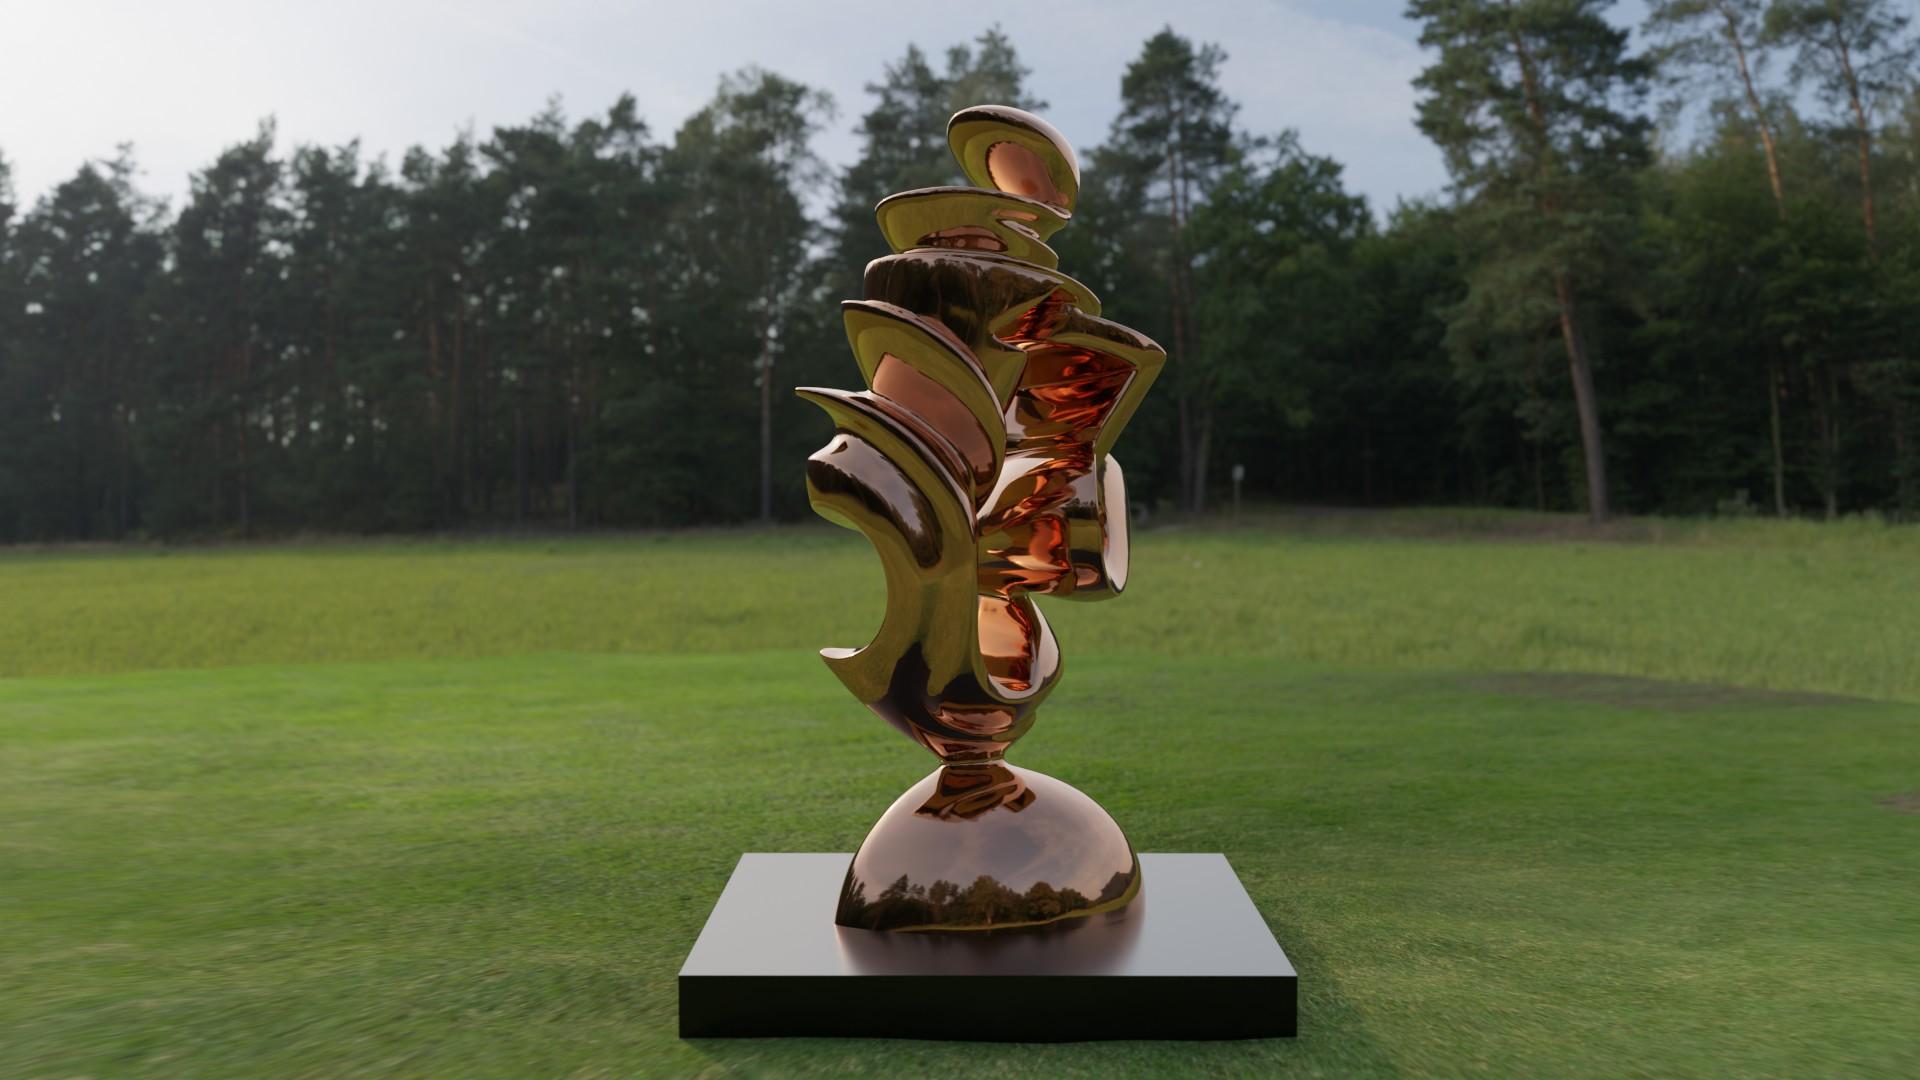 Expansion ( of the Heart ) - Gold Abstract Sculpture by Jan Willem Krijger